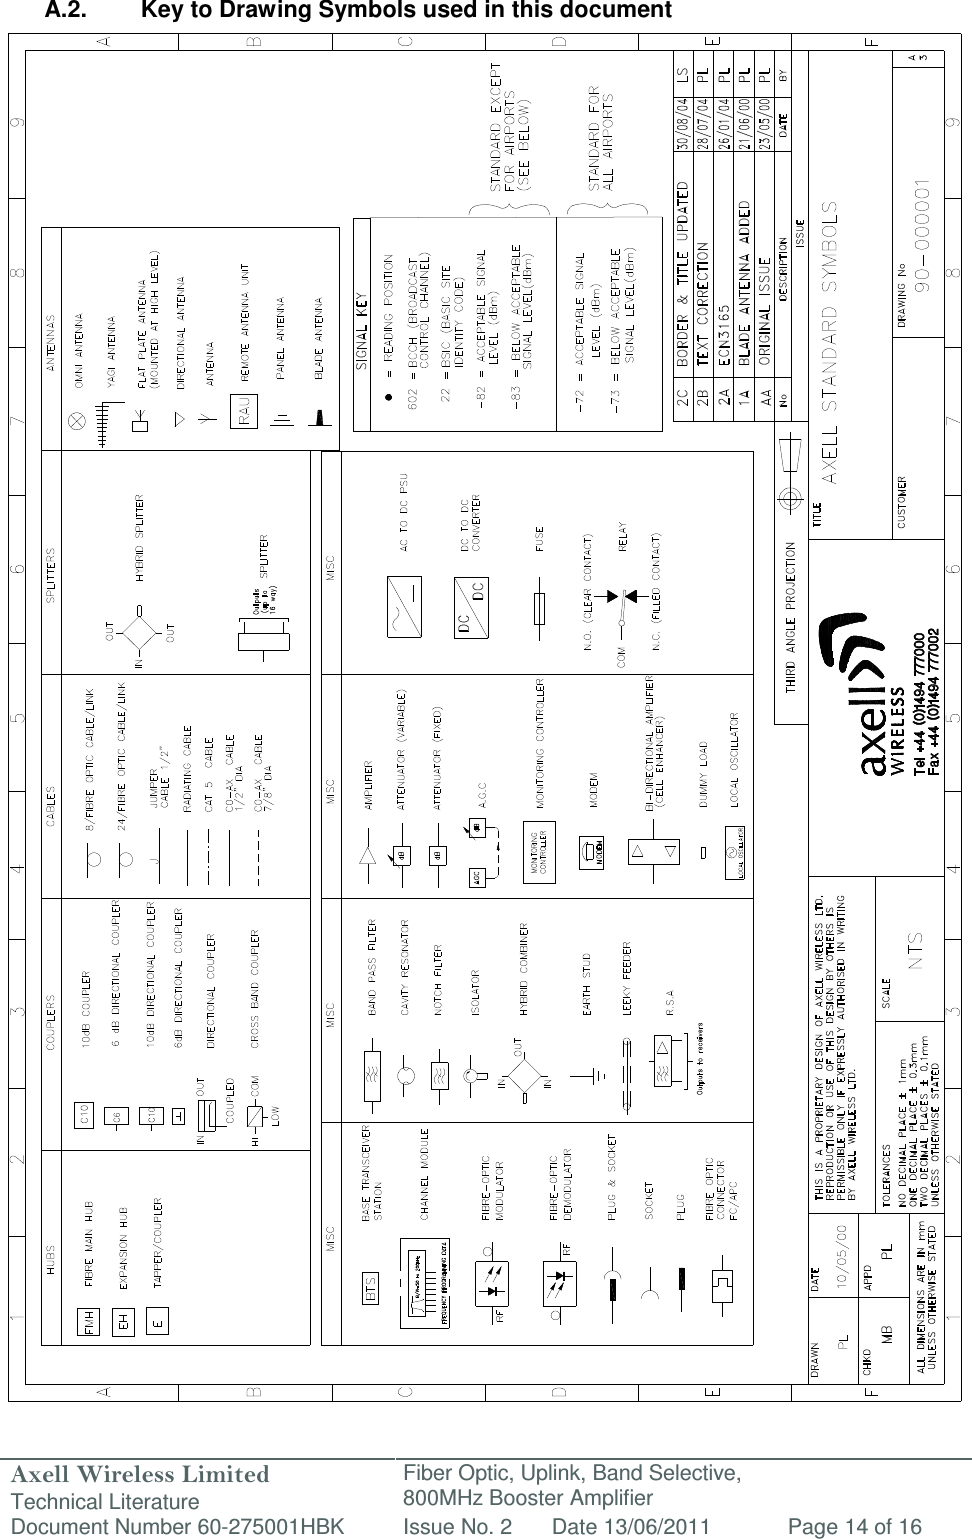 Axell Wireless Limited Technical Literature Fiber Optic, Uplink, Band Selective,  800MHz Booster Amplifier  Document Number 60-275001HBK Issue No. 2 Date 13/06/2011 Page 14 of 16   A.2.  Key to Drawing Symbols used in this document                                                          